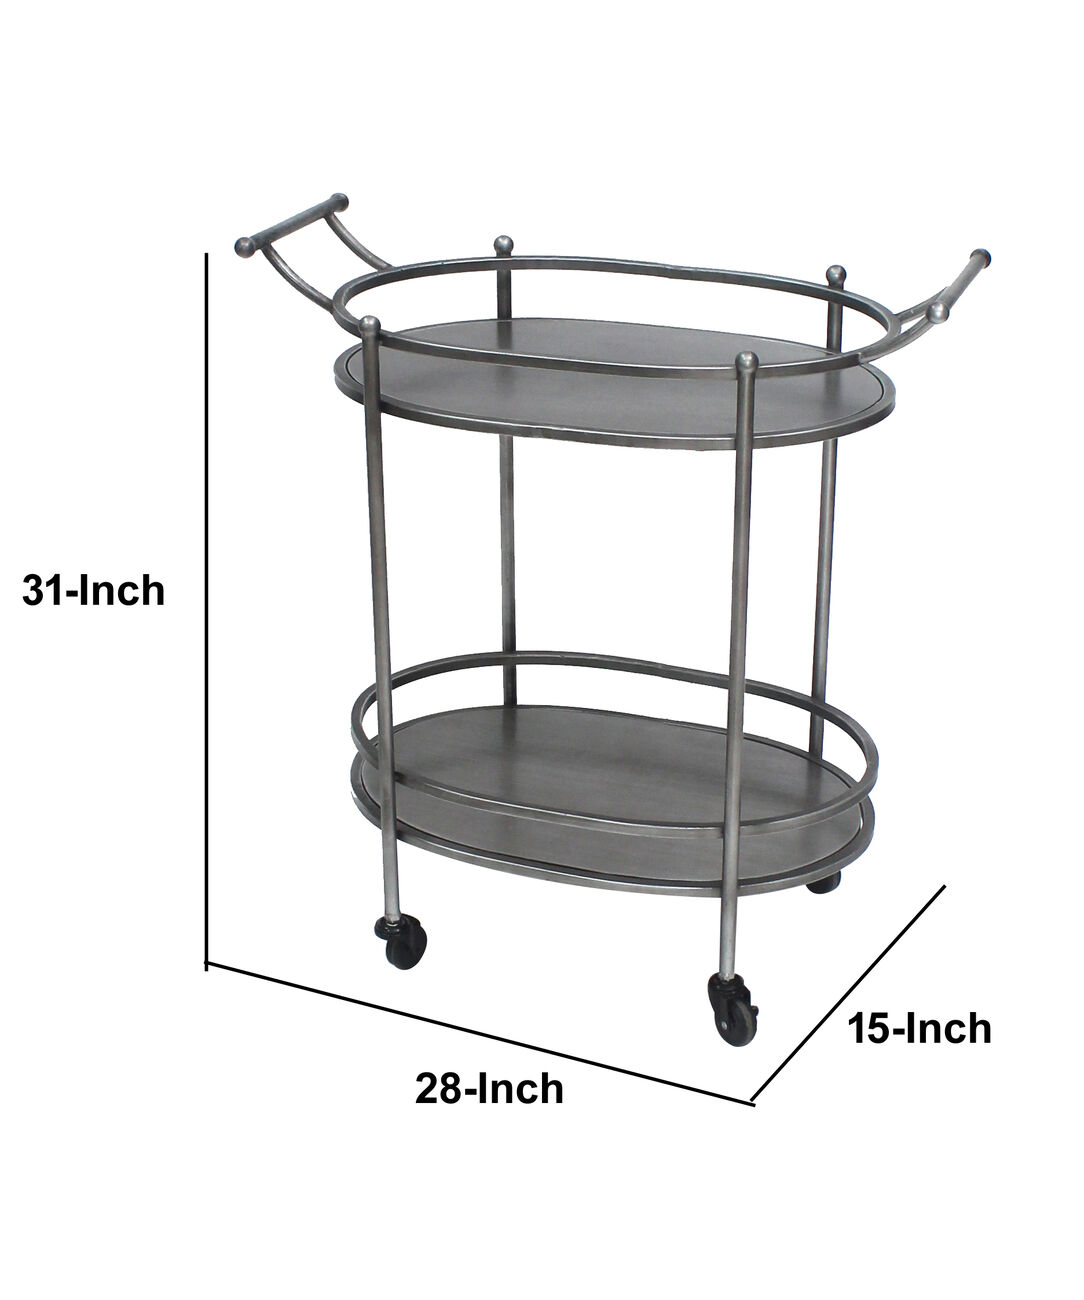 Oval Metal Frame Service Cart with Casters, Gray and Black